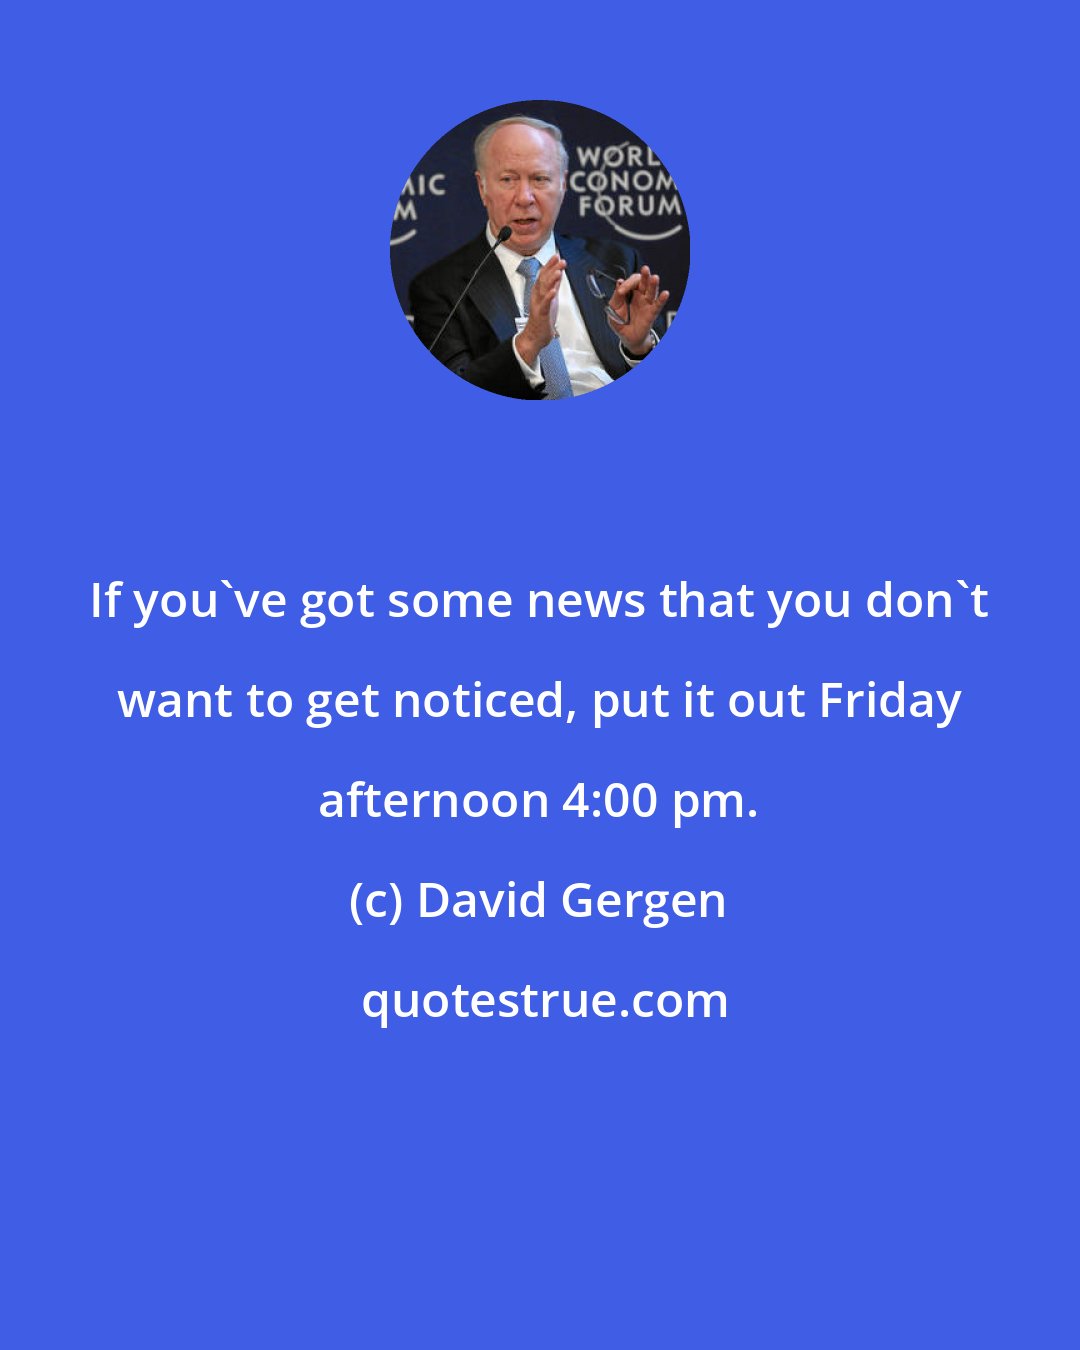 David Gergen: If you've got some news that you don't want to get noticed, put it out Friday afternoon 4:00 pm.